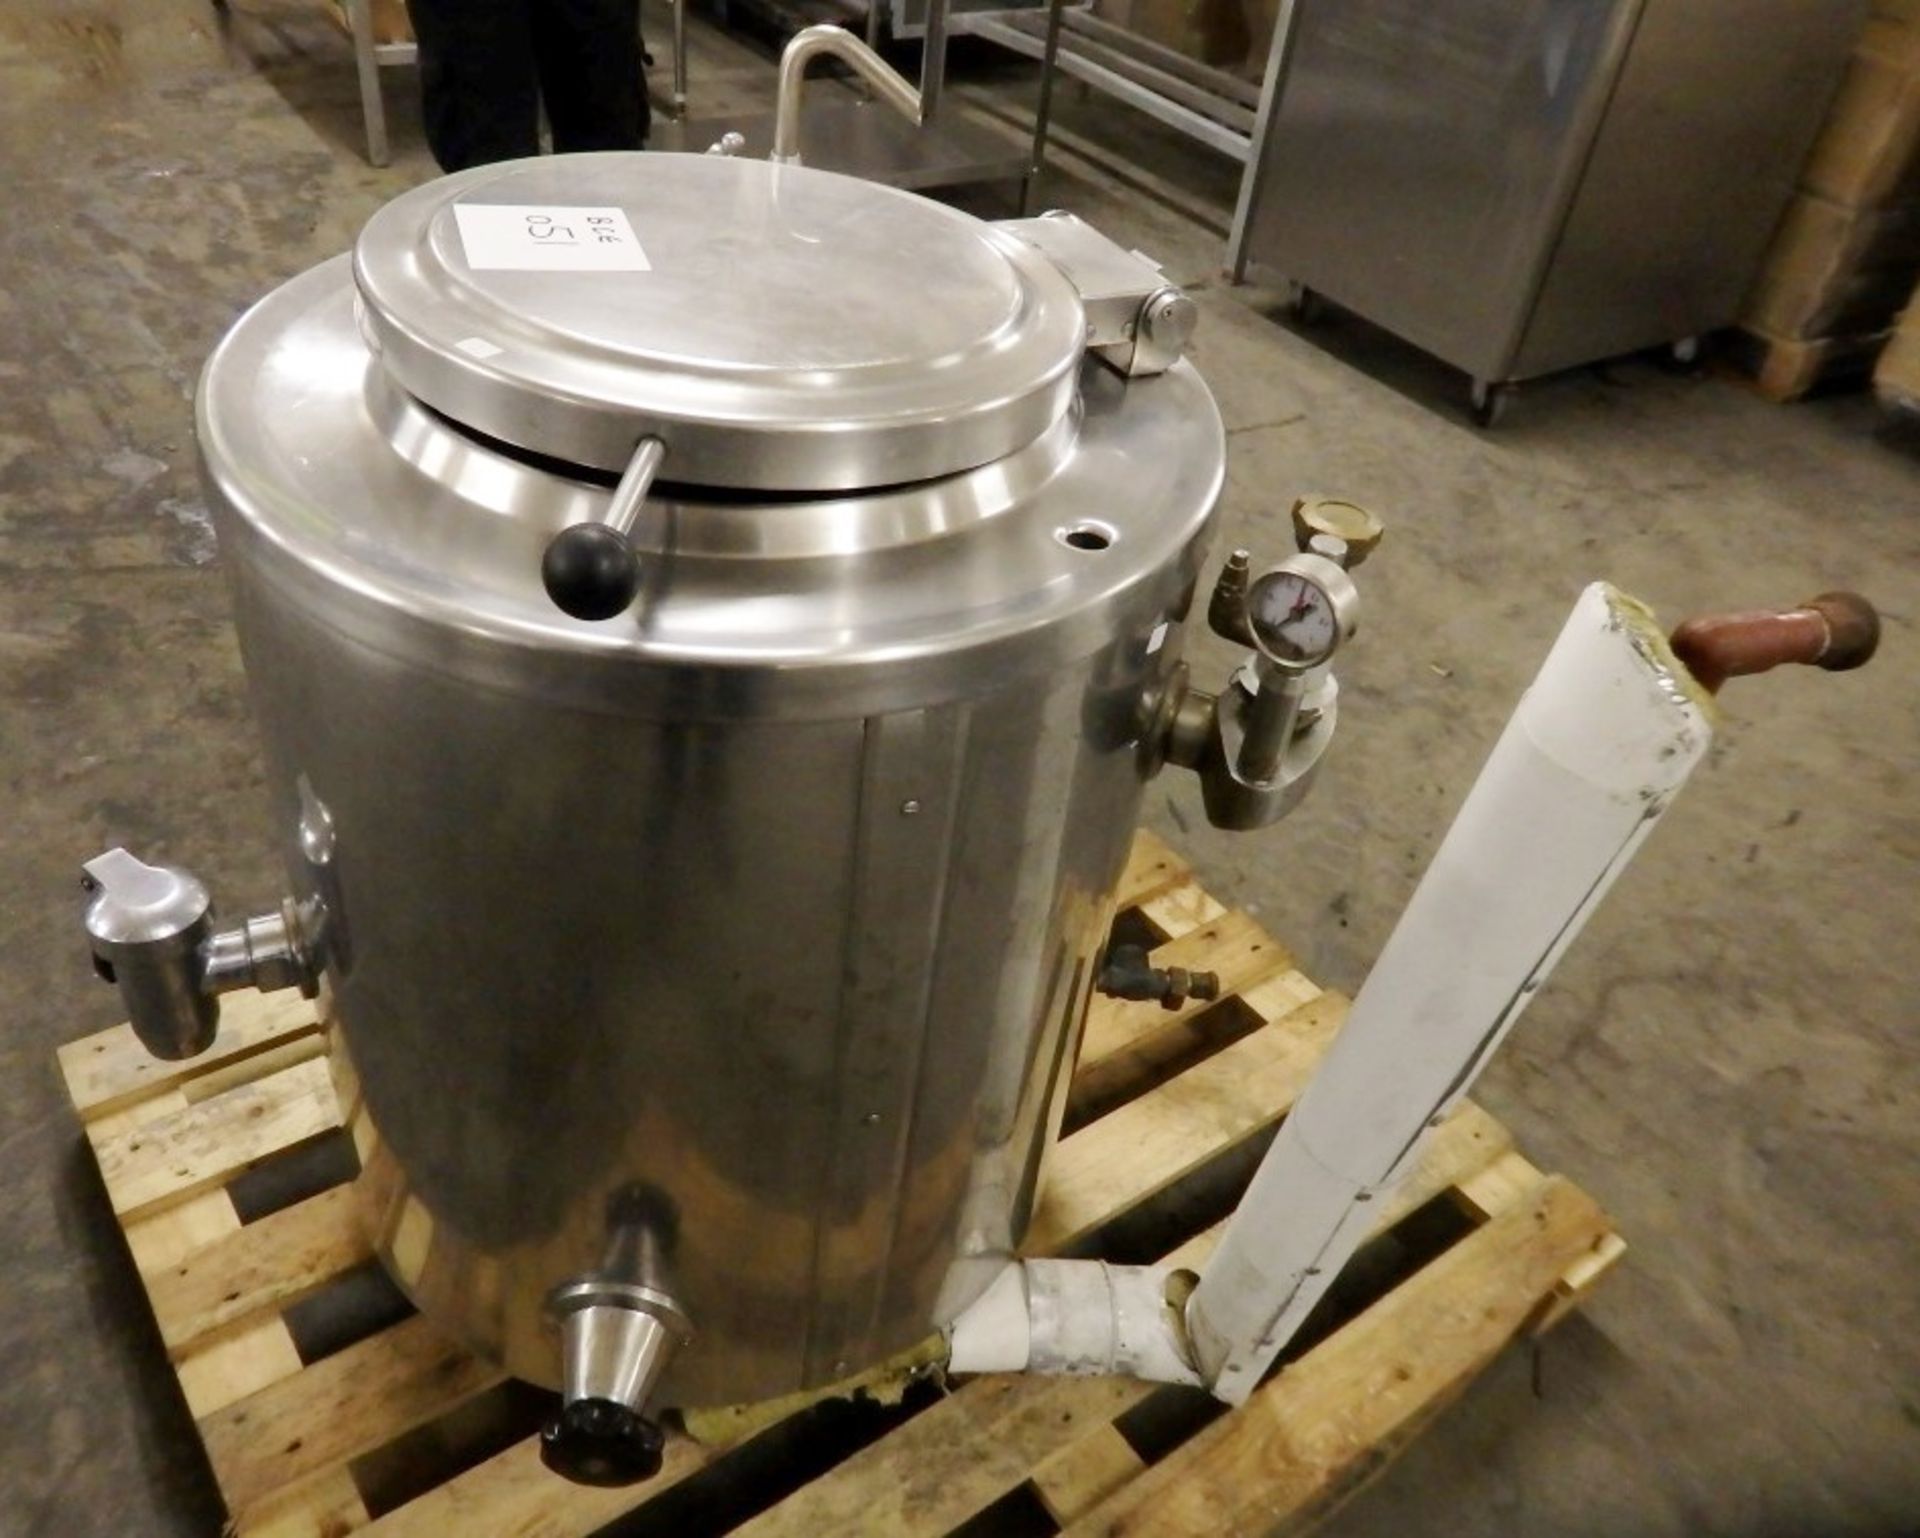 1 x "Bartlett" Stainless Steel Ham Boiler Cooking Tank - Ideal For Boiling Hams Or Other Meats - - Image 12 of 13